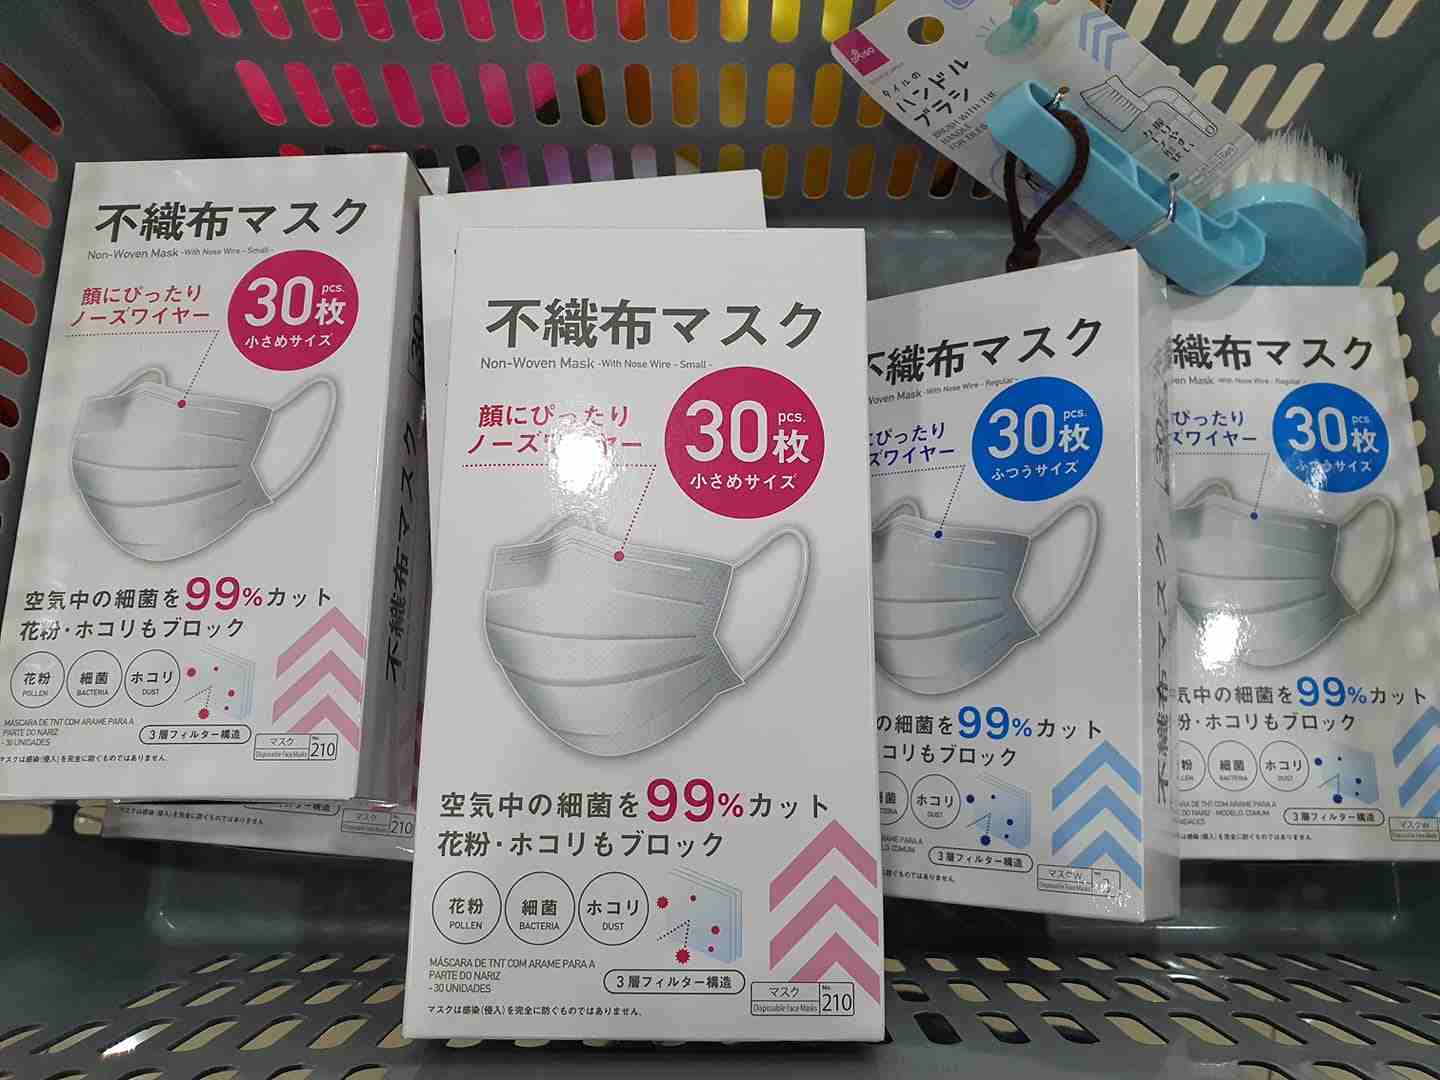 Daiso S'pore Sells 30 Face Masks For $2, Customers Can Only Buy 1